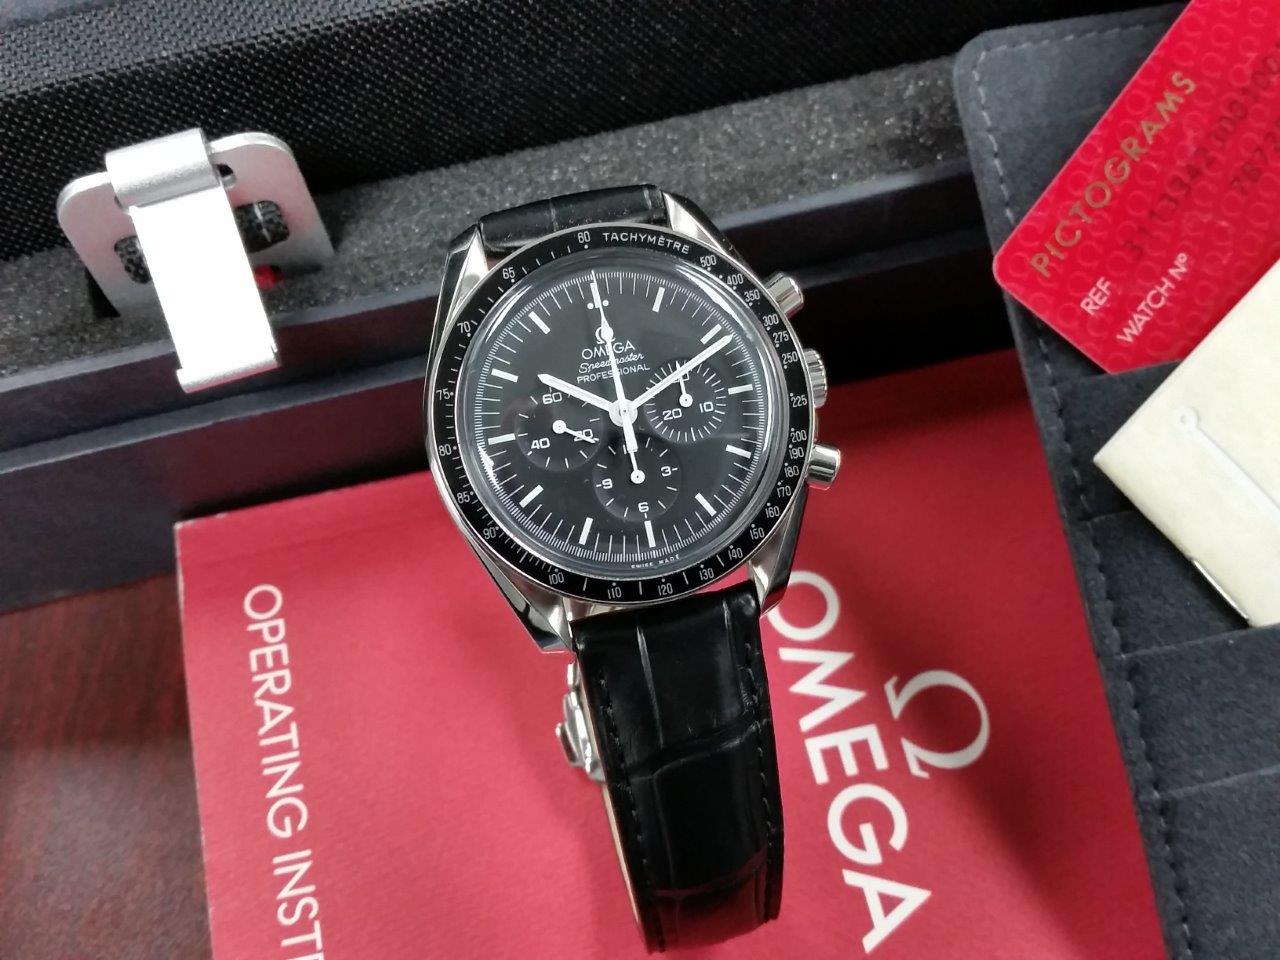 Omega SpeedMaster Professional MoonWatch 31133423001001 Black Leather Box/Papers